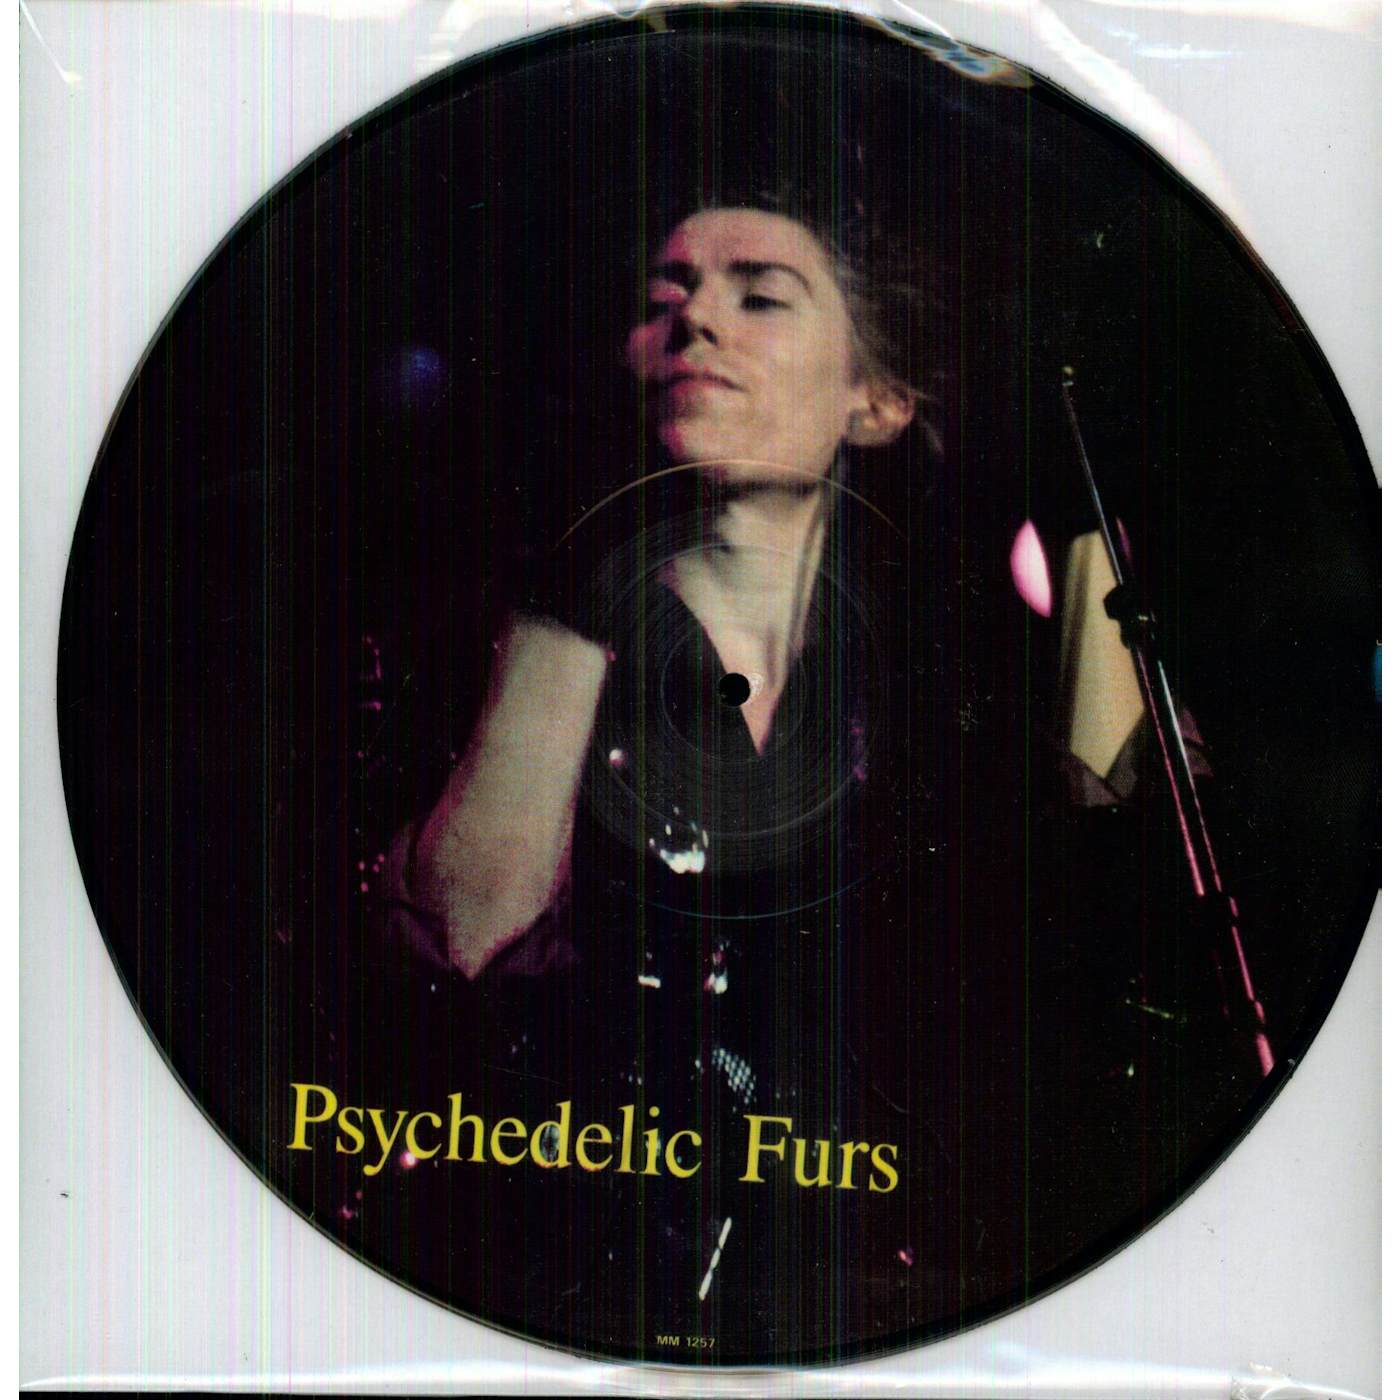 The Psychedelic Furs INTERVIEW PICTURE DISC Vinyl Record